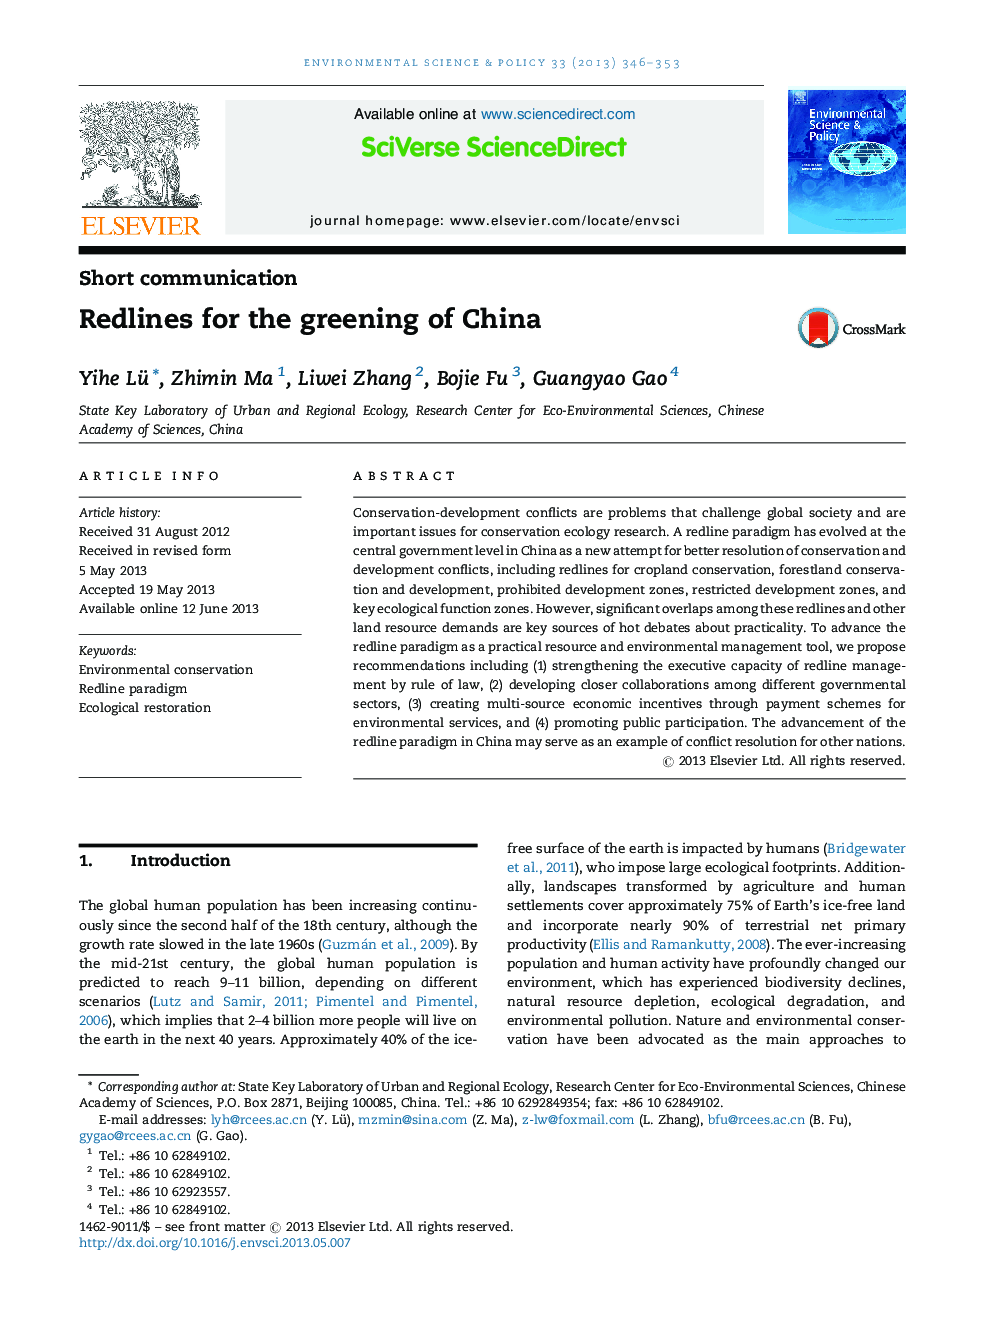 Redlines for the greening of China